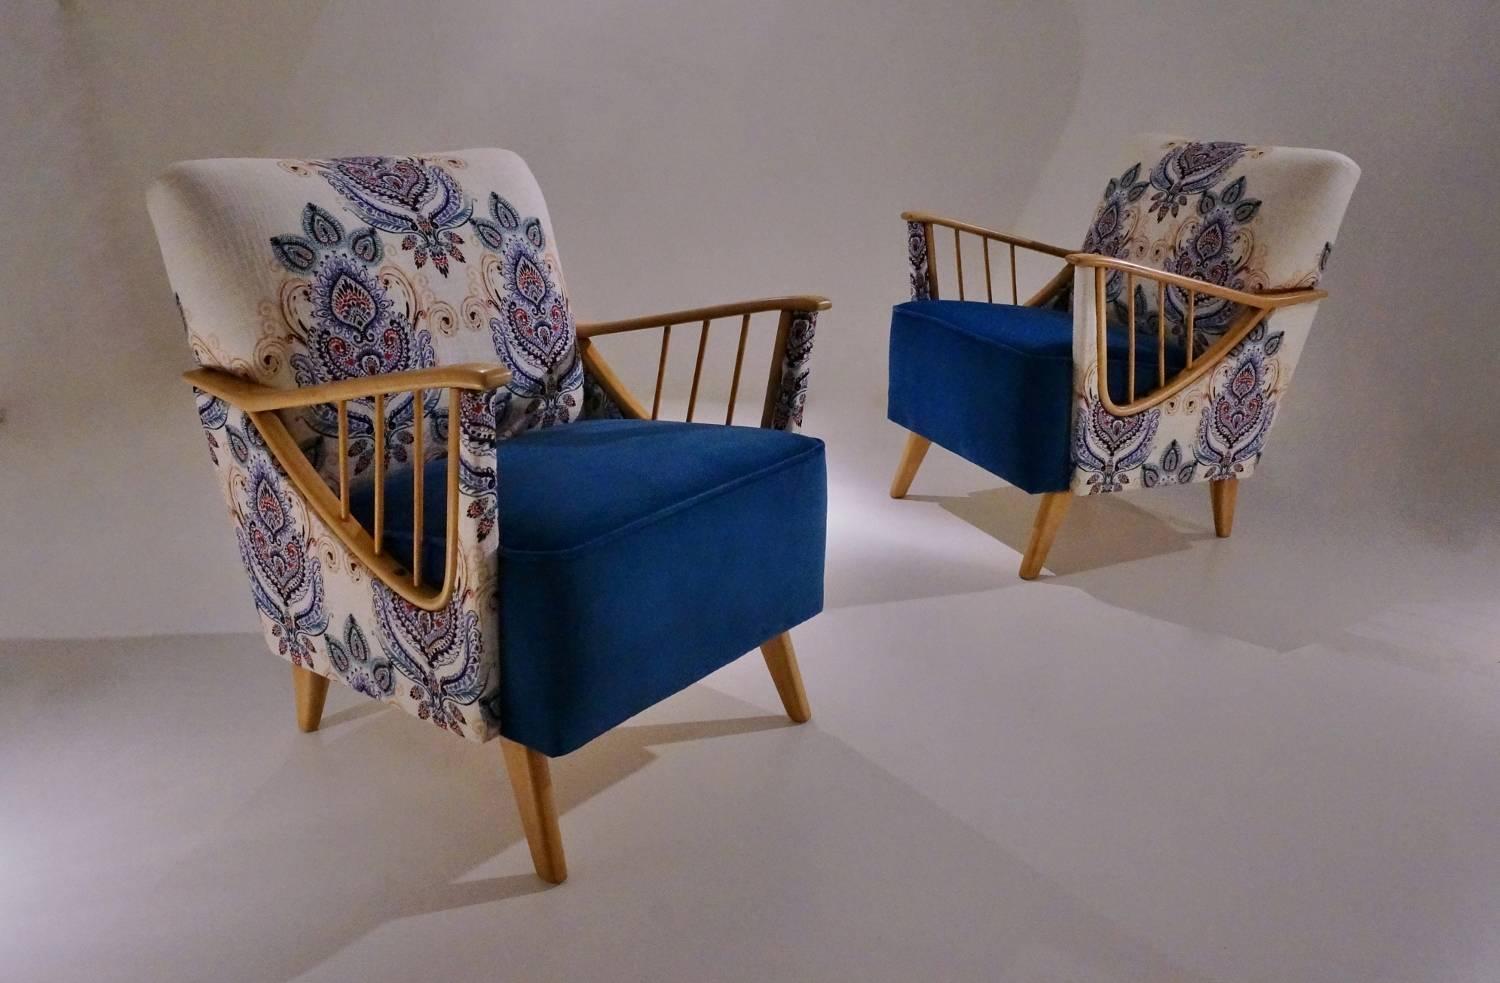 Ercol Windsor armchairs, a pair, newly upholstered, circa 1950s, English.

Both vintage armchairs have been beautifully restored; newly reupholstered and the wooden arms and legs re-polished.

This pair of 1950s armchairs attributed to Lucian